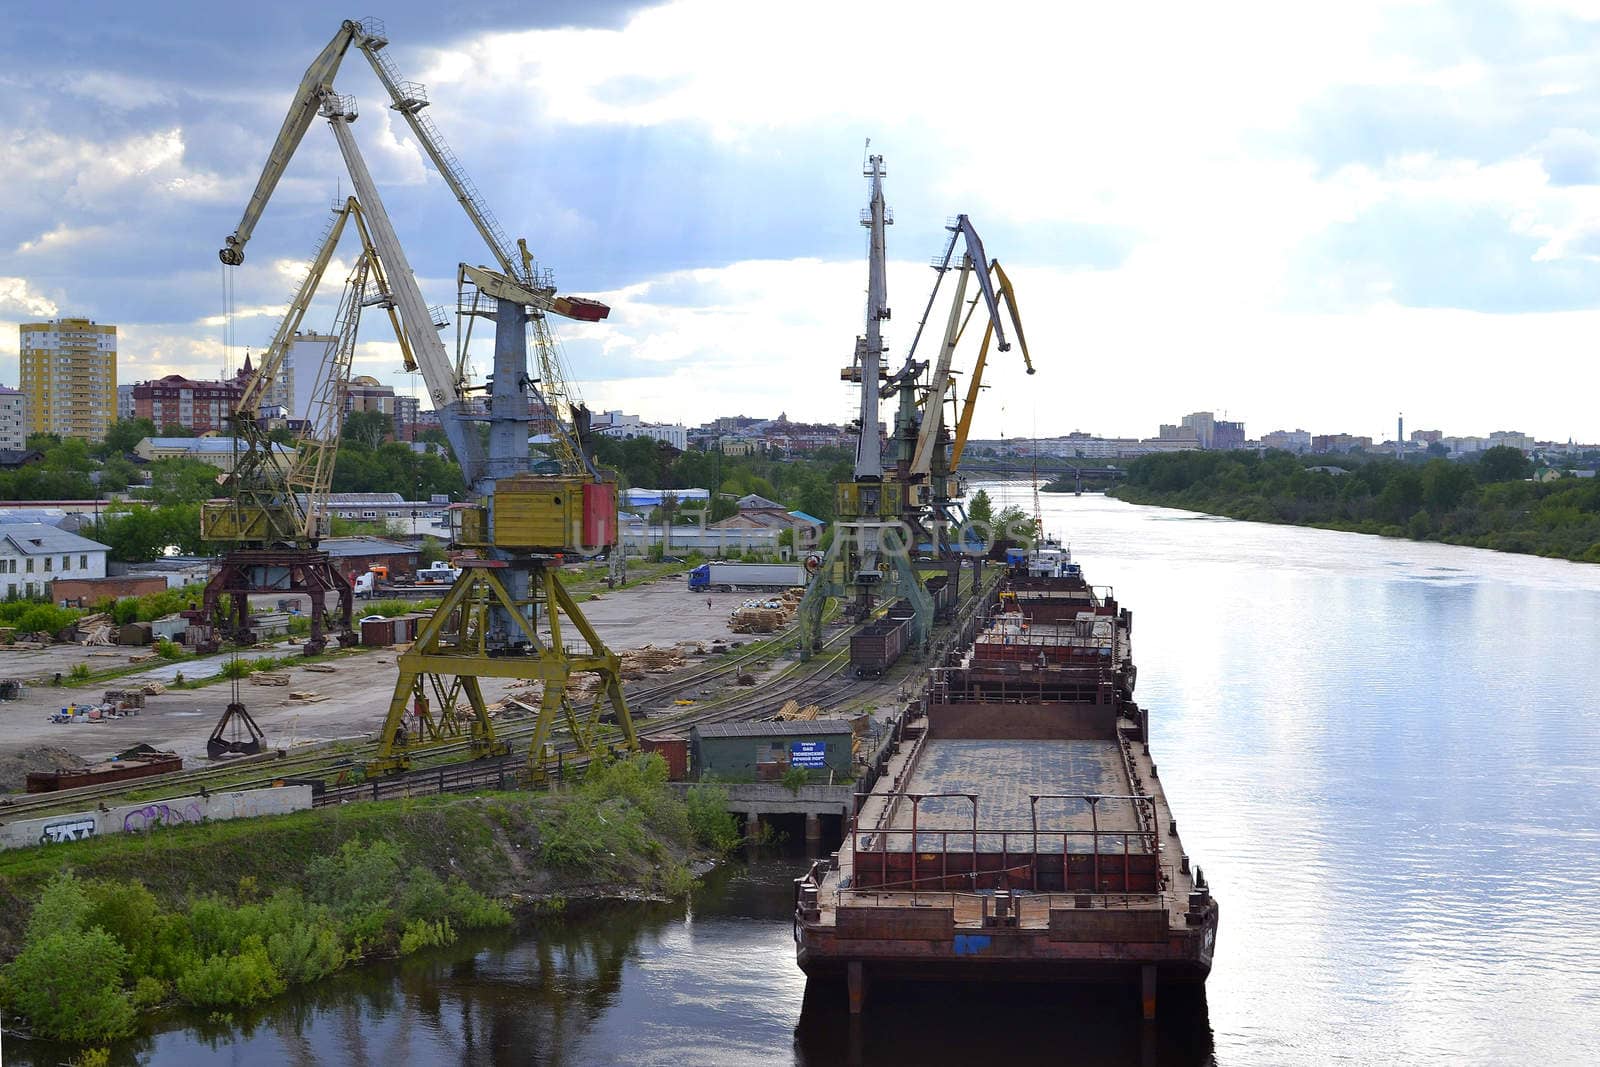 River port on the Tura River in Tyumen, Russia by veronka72